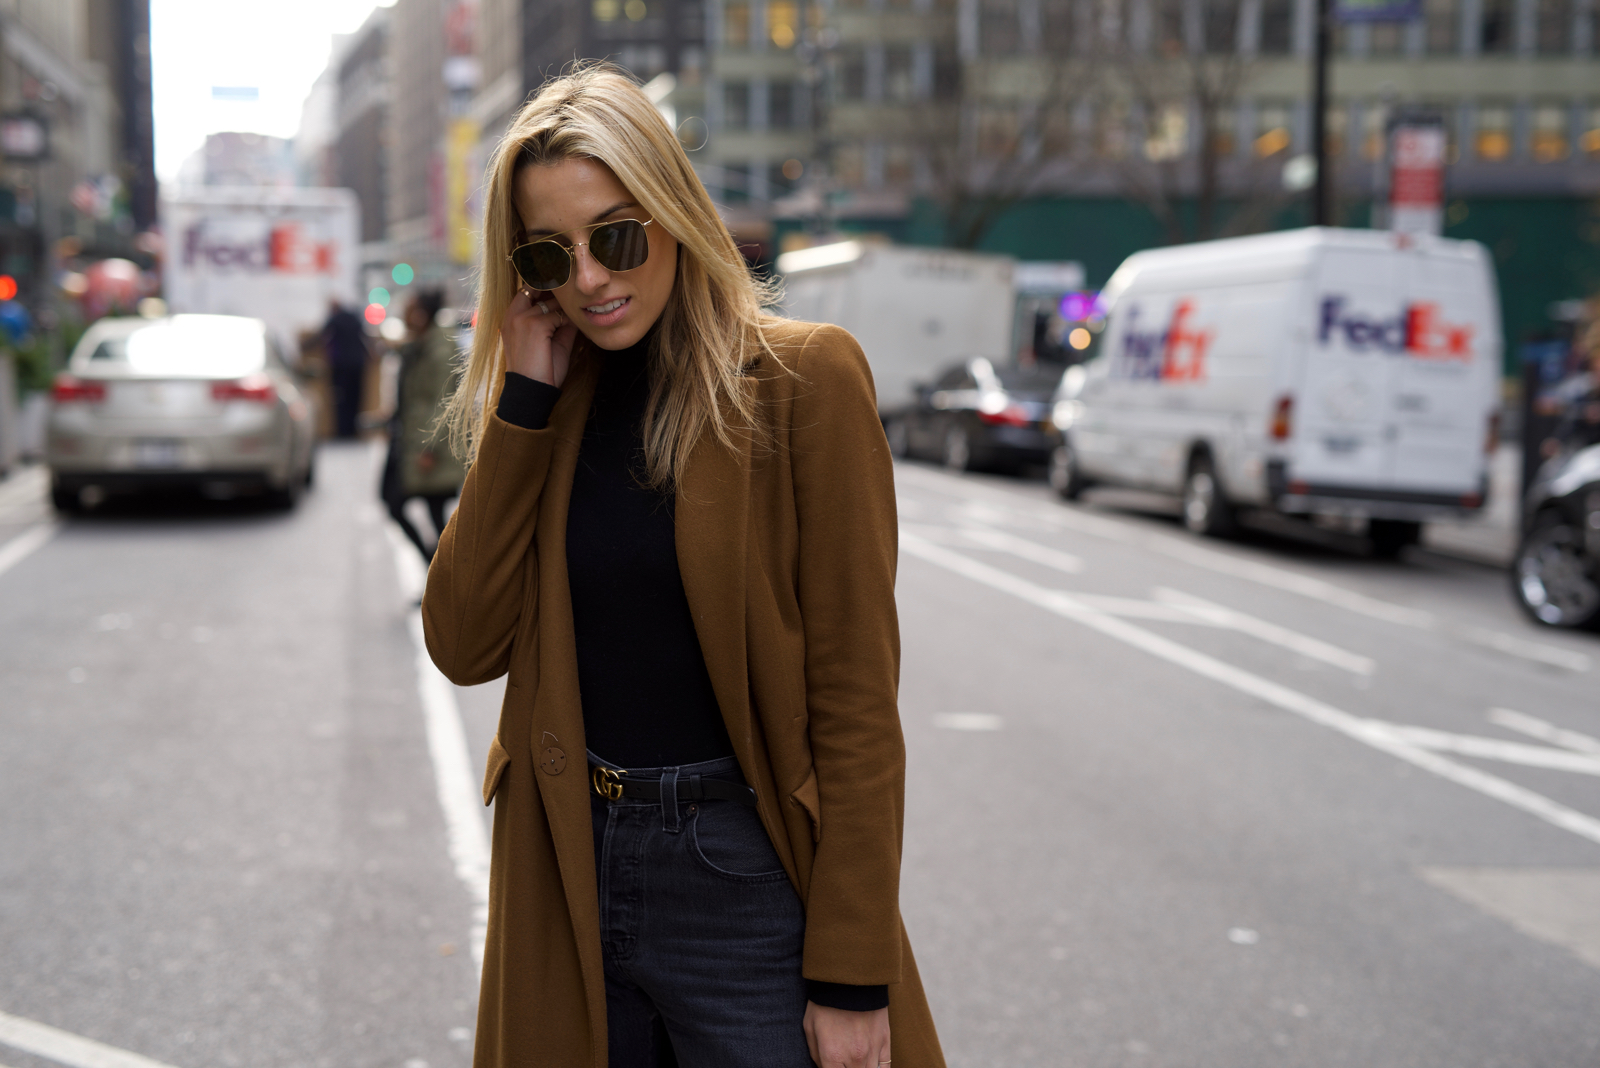 NYC Street Style in All Black with a Camel Coat - Lisa D CahueLisa D Cahue